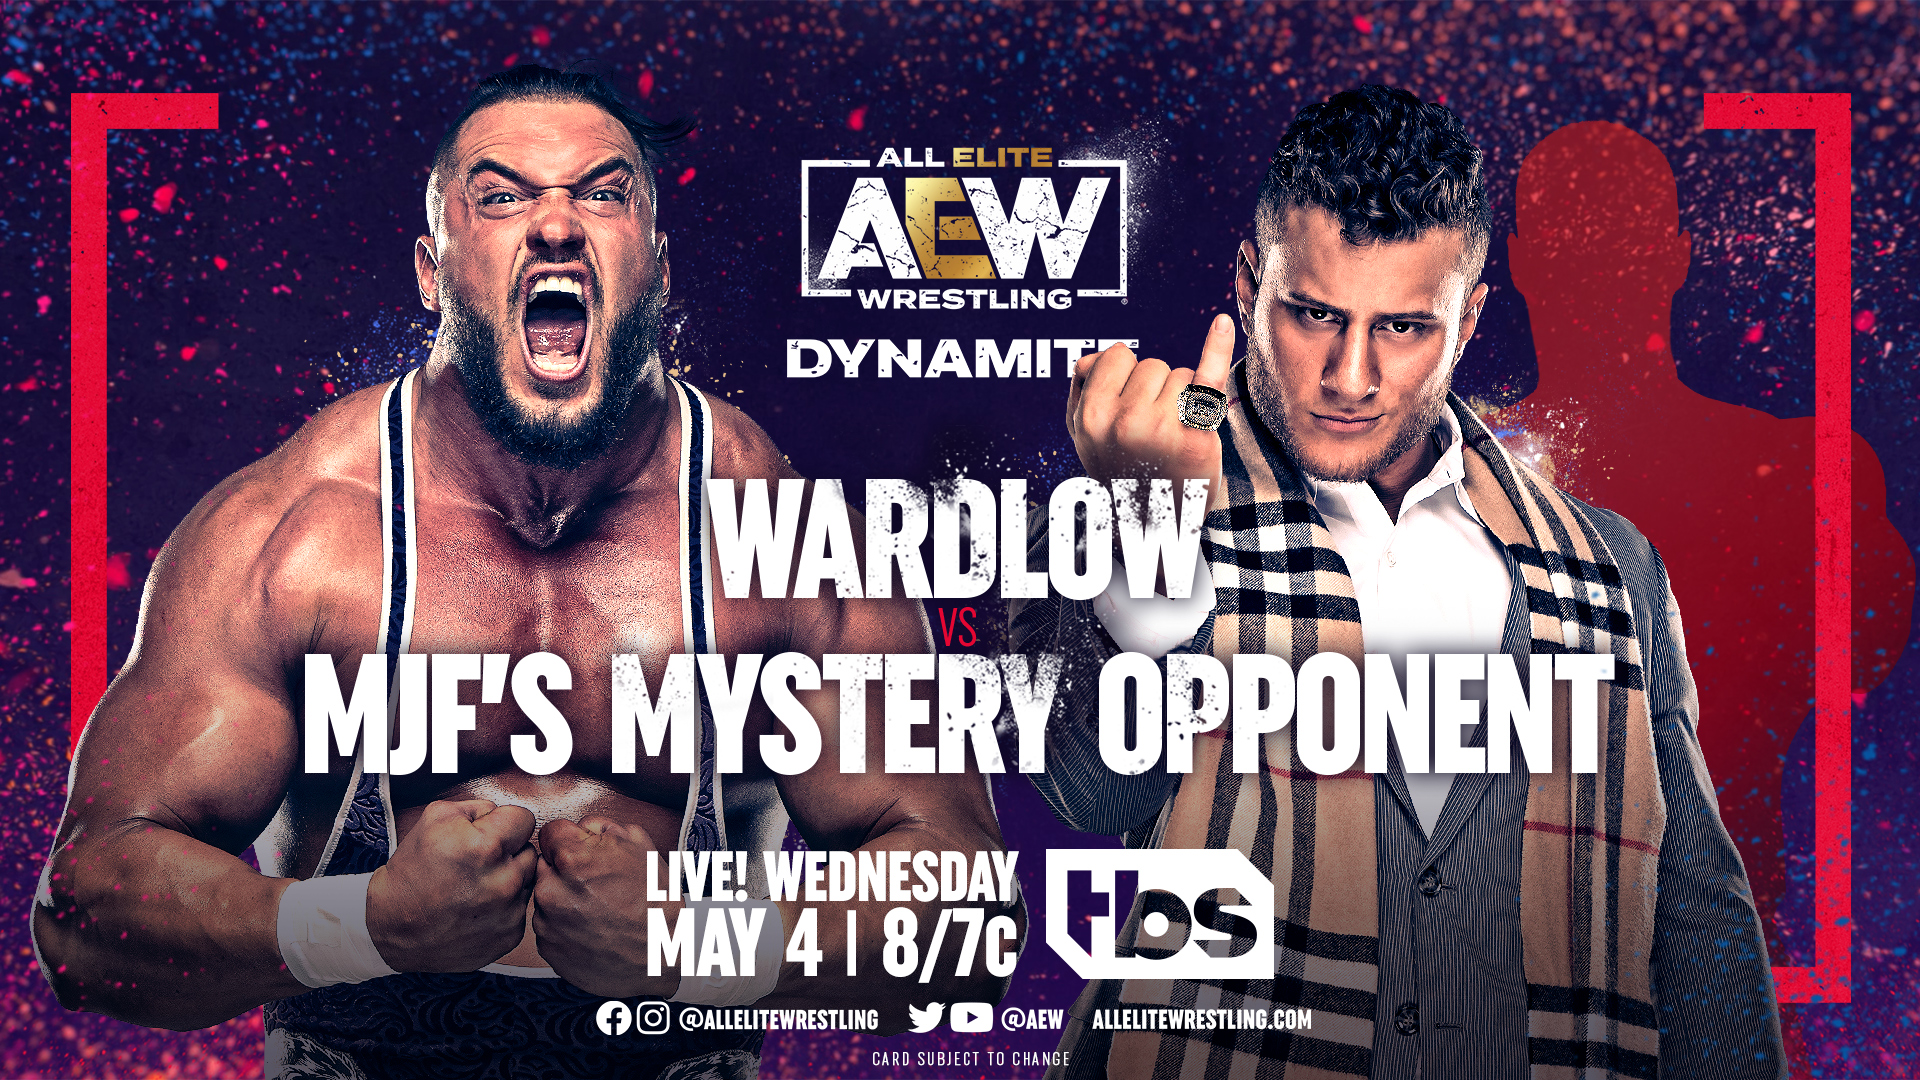 All Elite Wrestling on Twitter: "After Wardlow wreaked havoc against @LanceHoyt at #AEWDynamite, @The_MJF sets up a match for @RealWardlow this WEDNESDAY against a mystery opponent who is "smarter", "stronger" & "taller